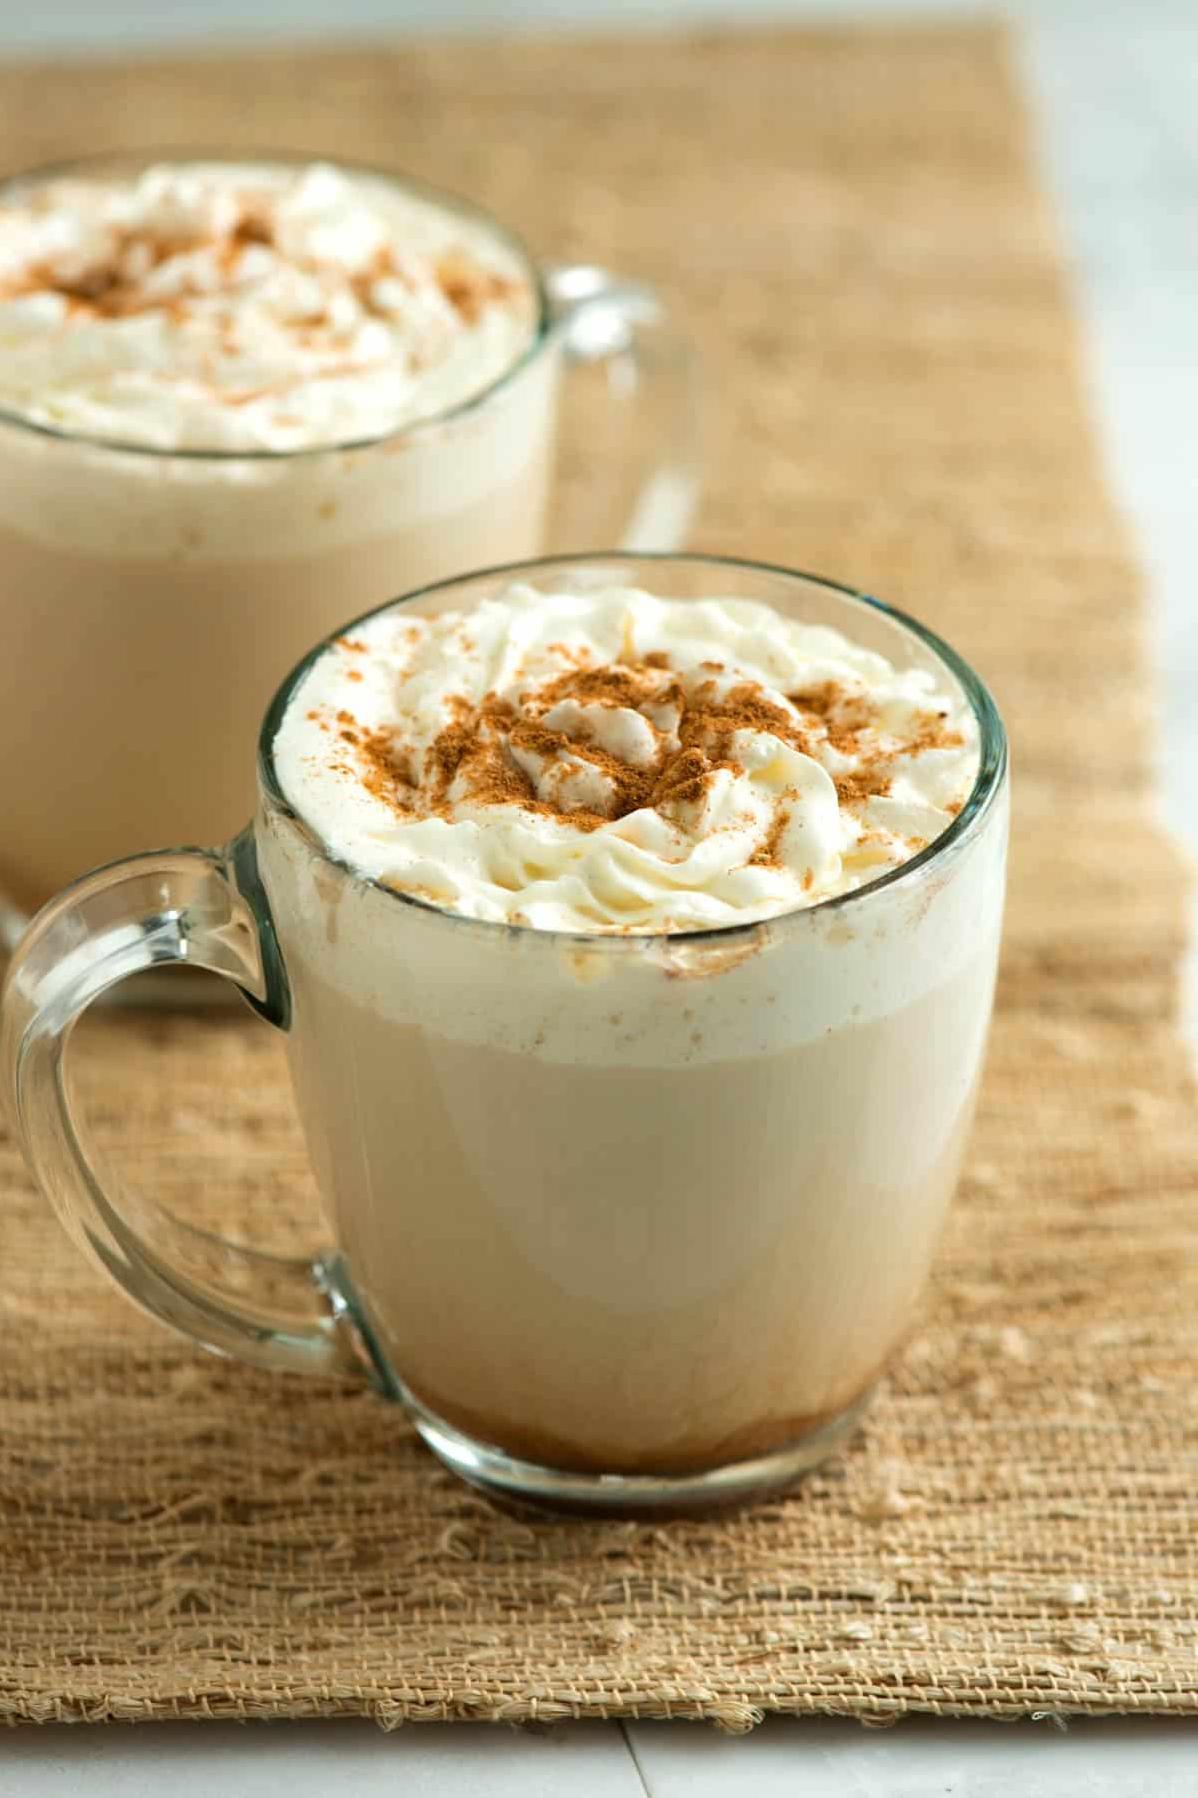  Warm up with our creamy Spiced Pumpkin Latte!